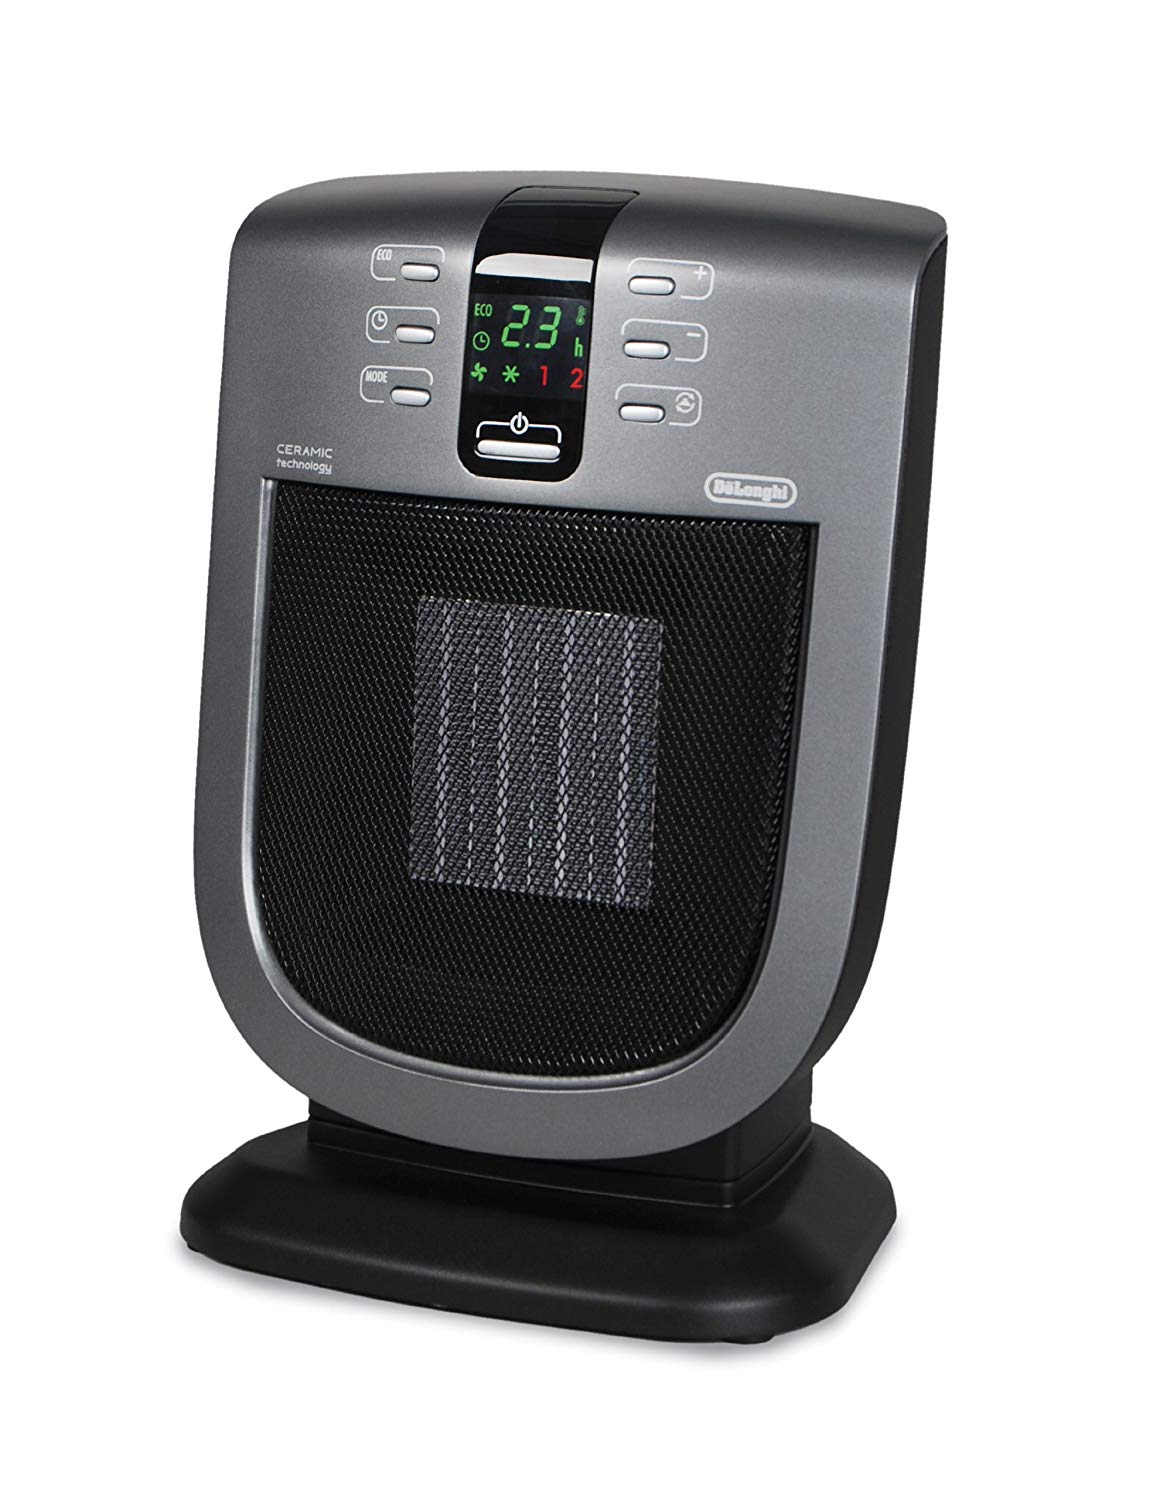 Delonghi Safeheat 1500 Watt Digital Ceramic Heater With Remote Control And Eco Energy Setting with regard to size 1150 X 1500